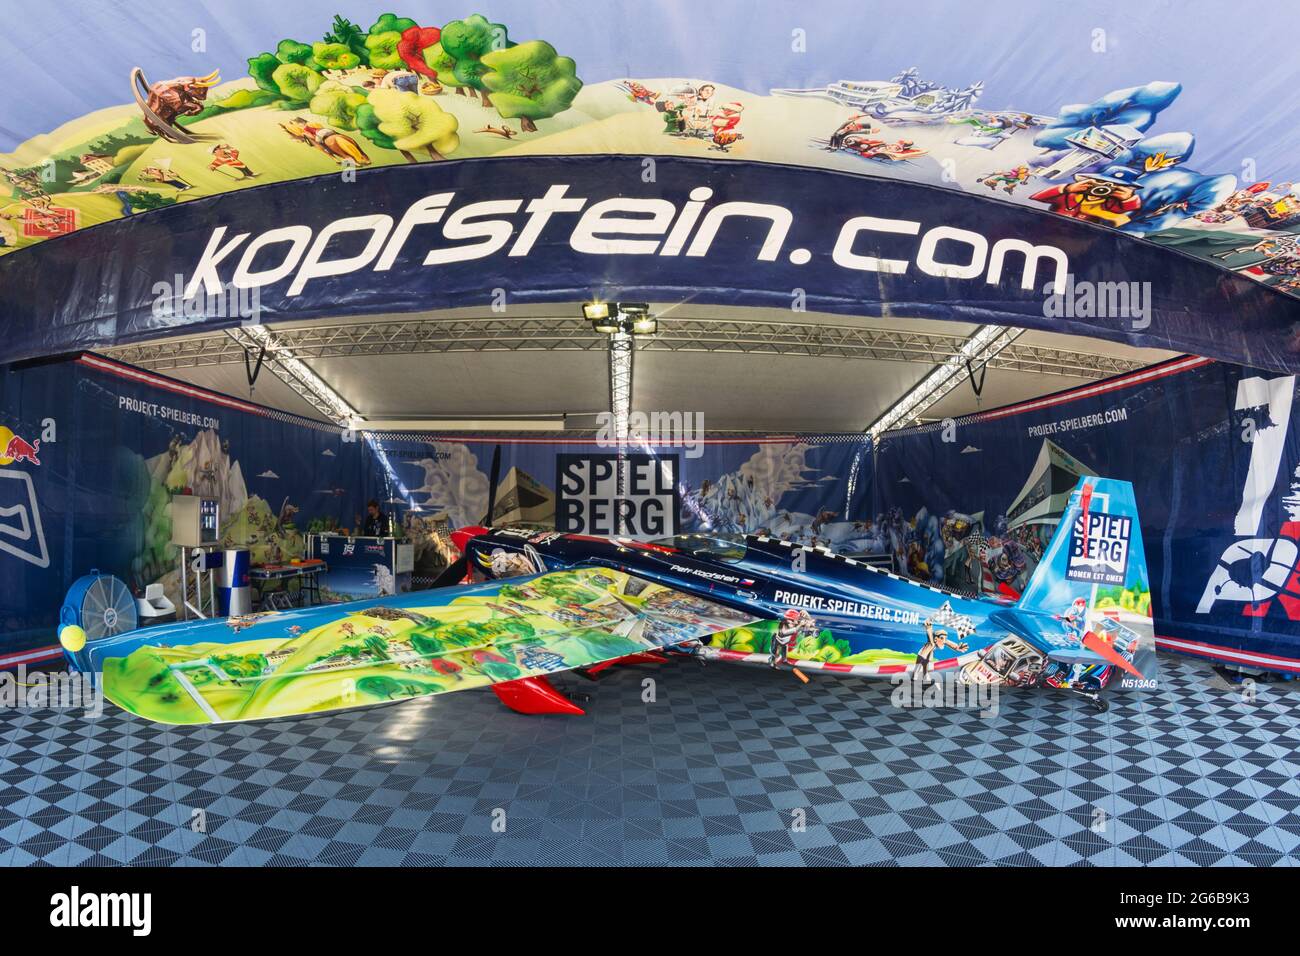 Budapest, Hungary - June 23, 2018: Colorful wing of Zivko Edge 540 used by Petr Kopfstein in race airport's hangar at Red Bull Air Race Stock Photo